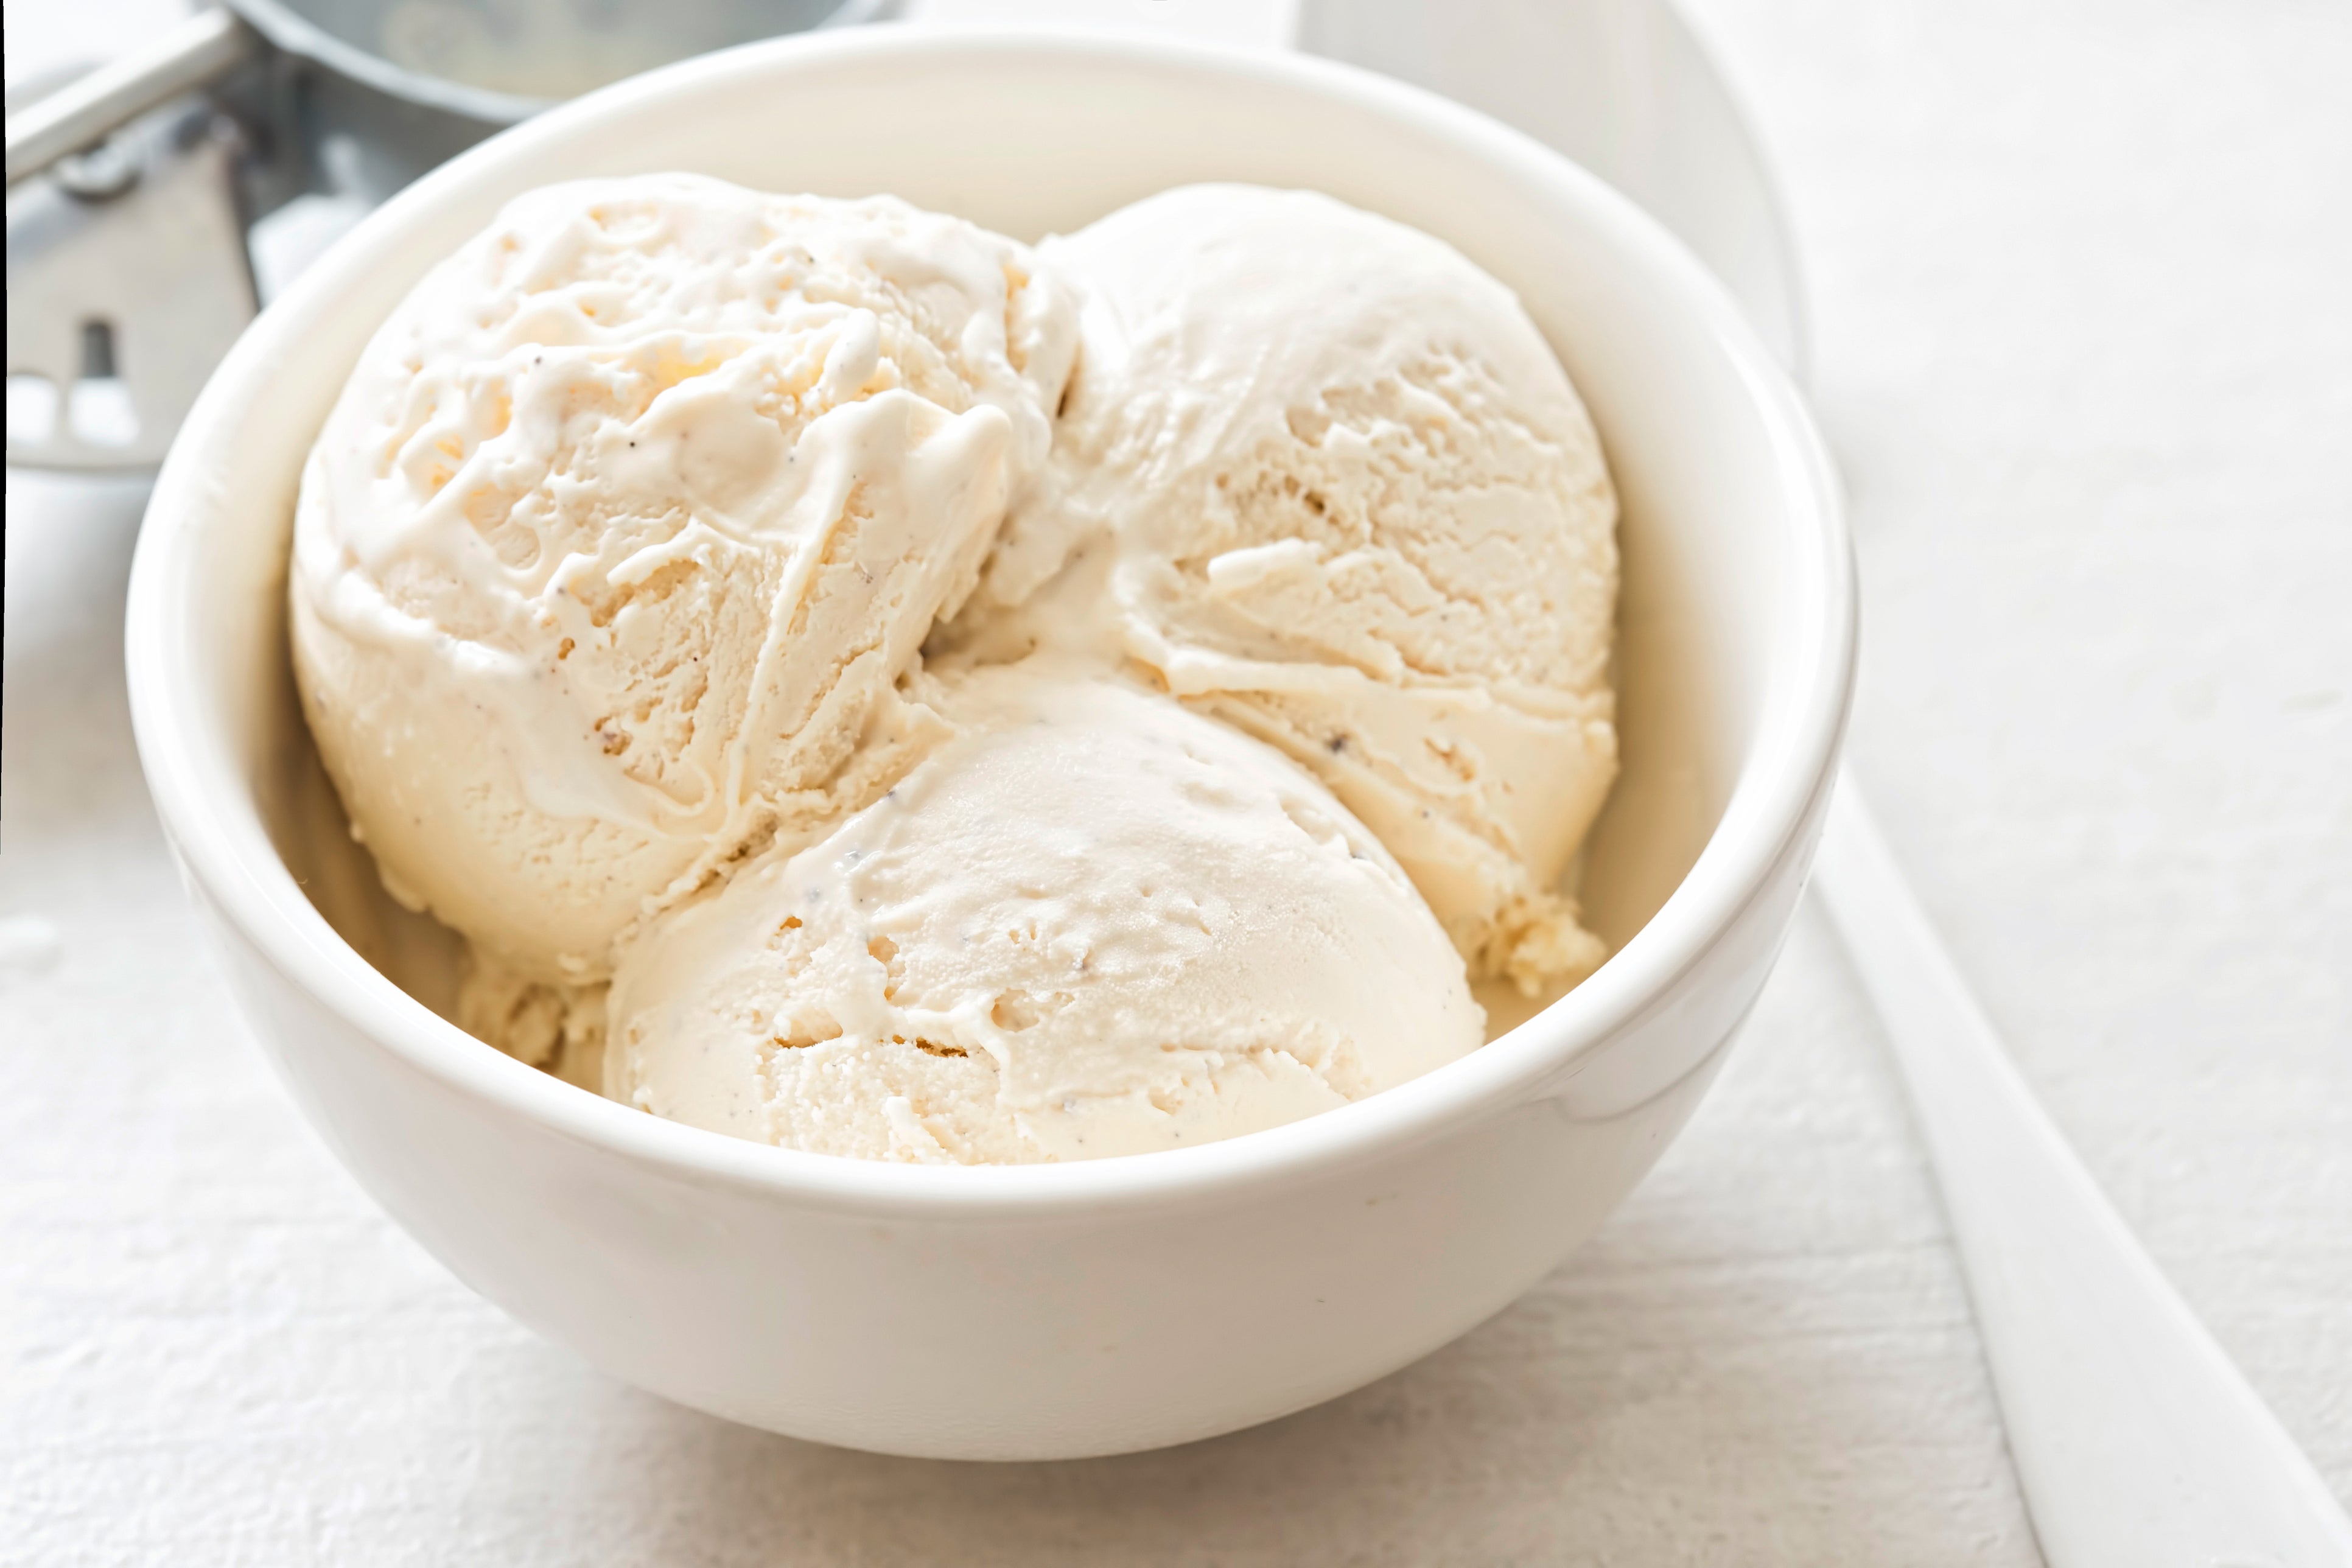 Very popular a few years ago, goat cheese ice cream deserves revisiting